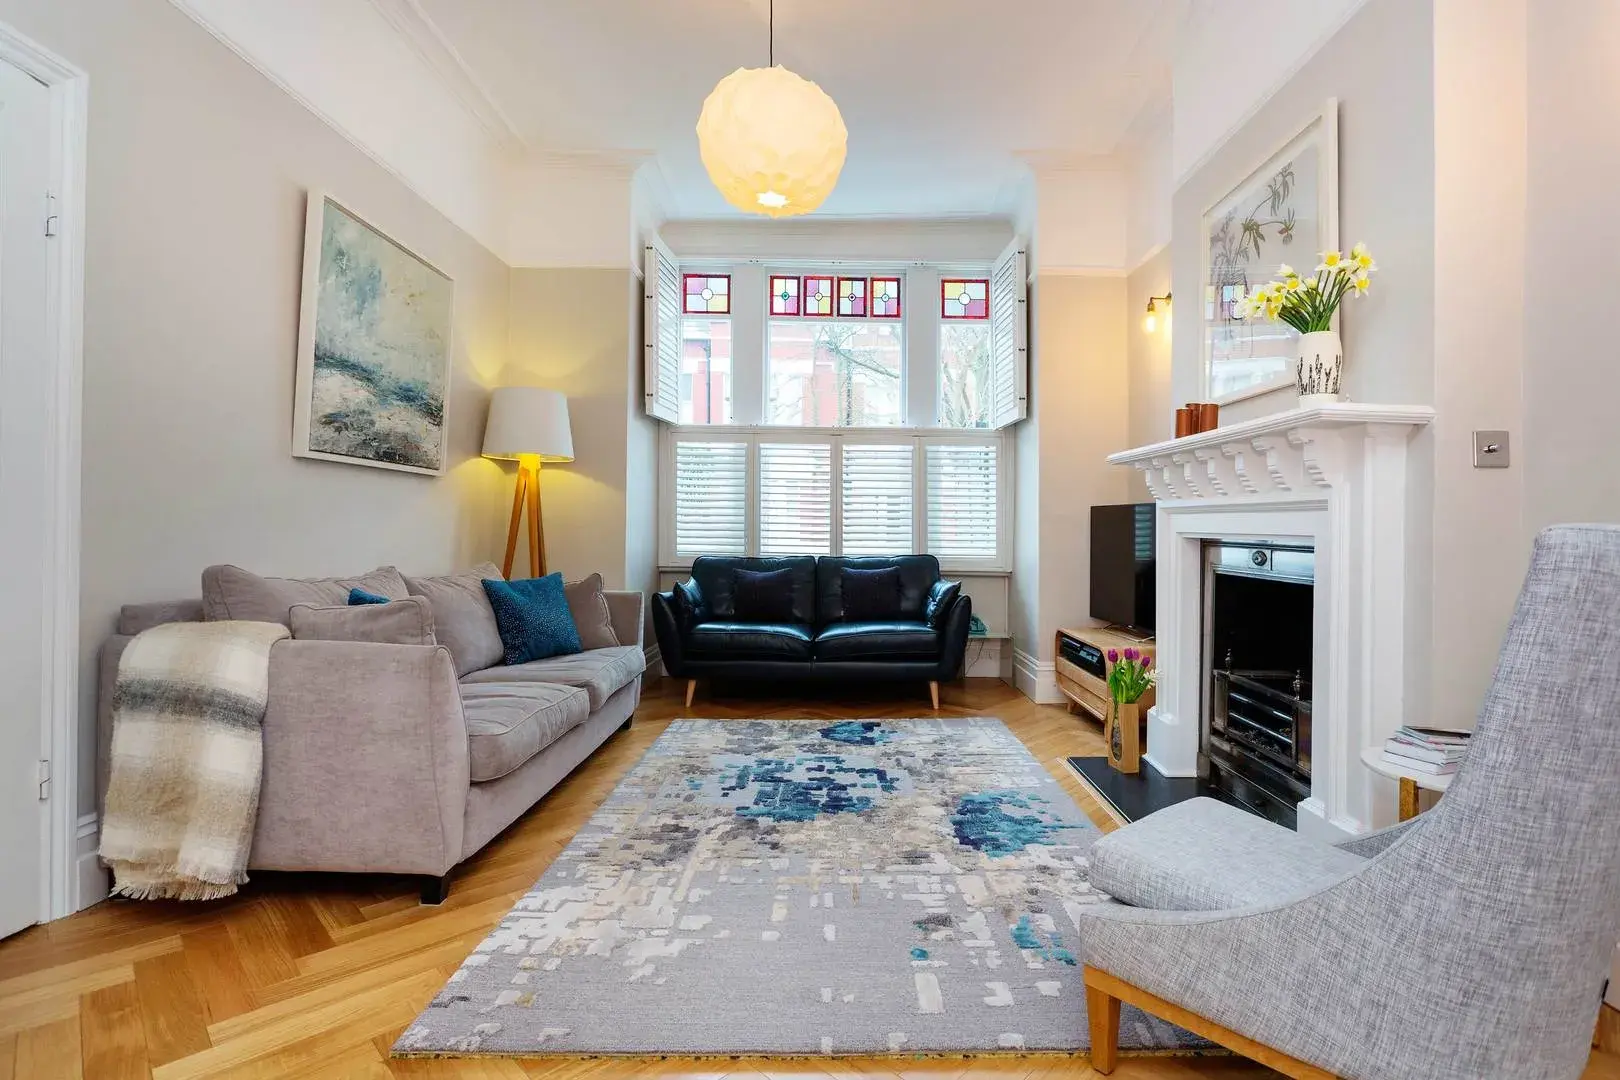 Gladsmuir Road, holiday home in Highgate, London